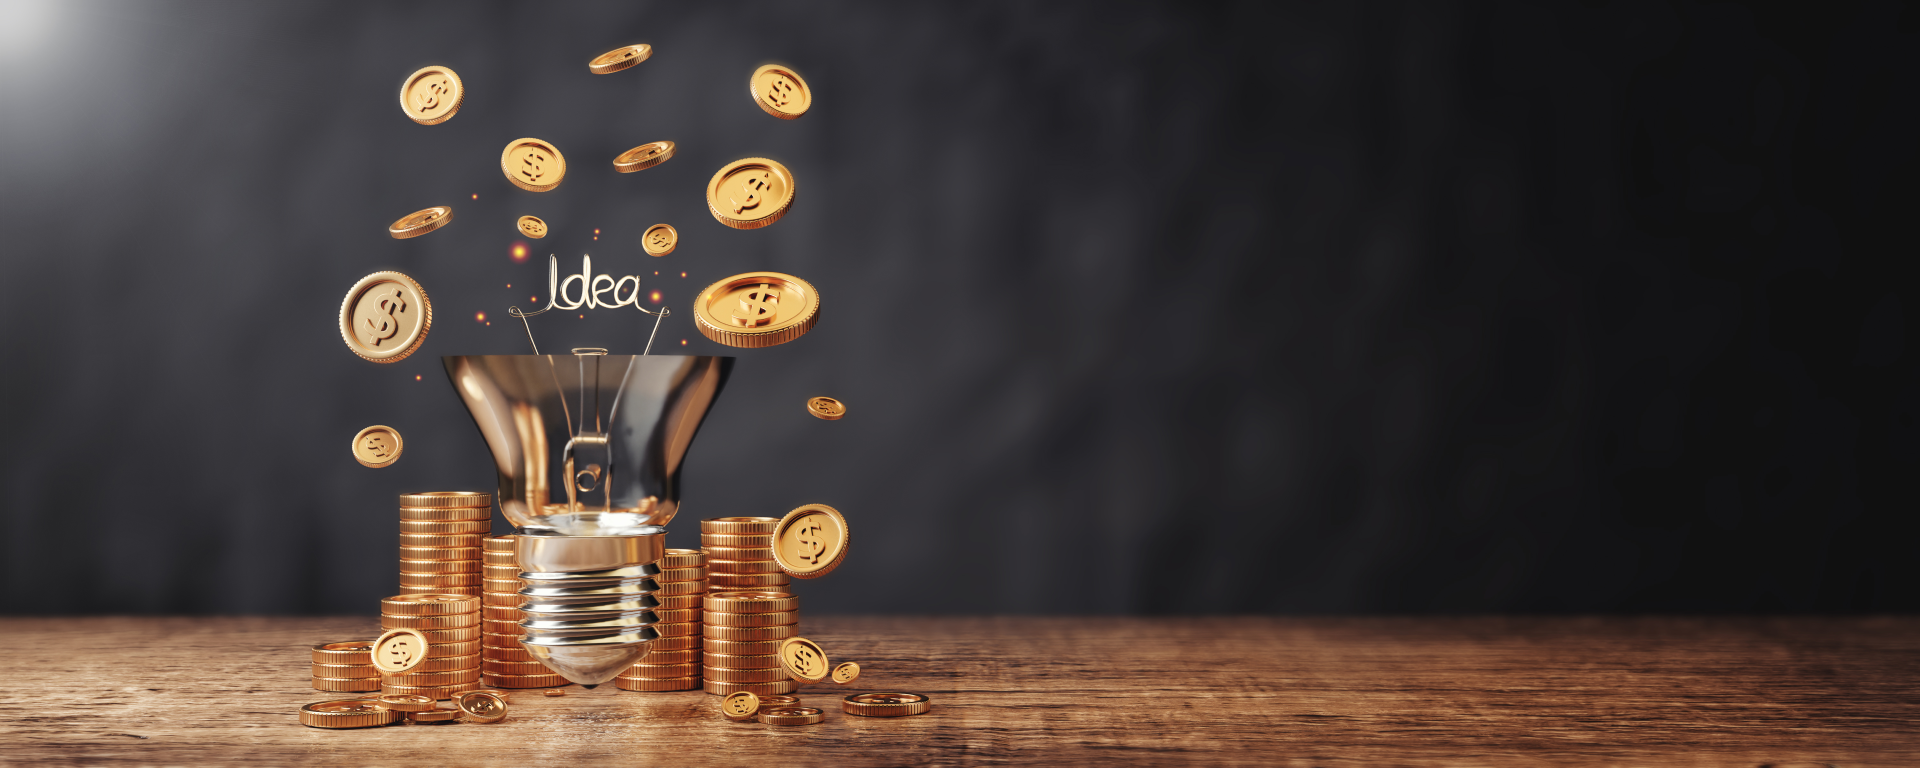 Money making ideas with Light bulb and money coins stack with banner size 3d illustrations